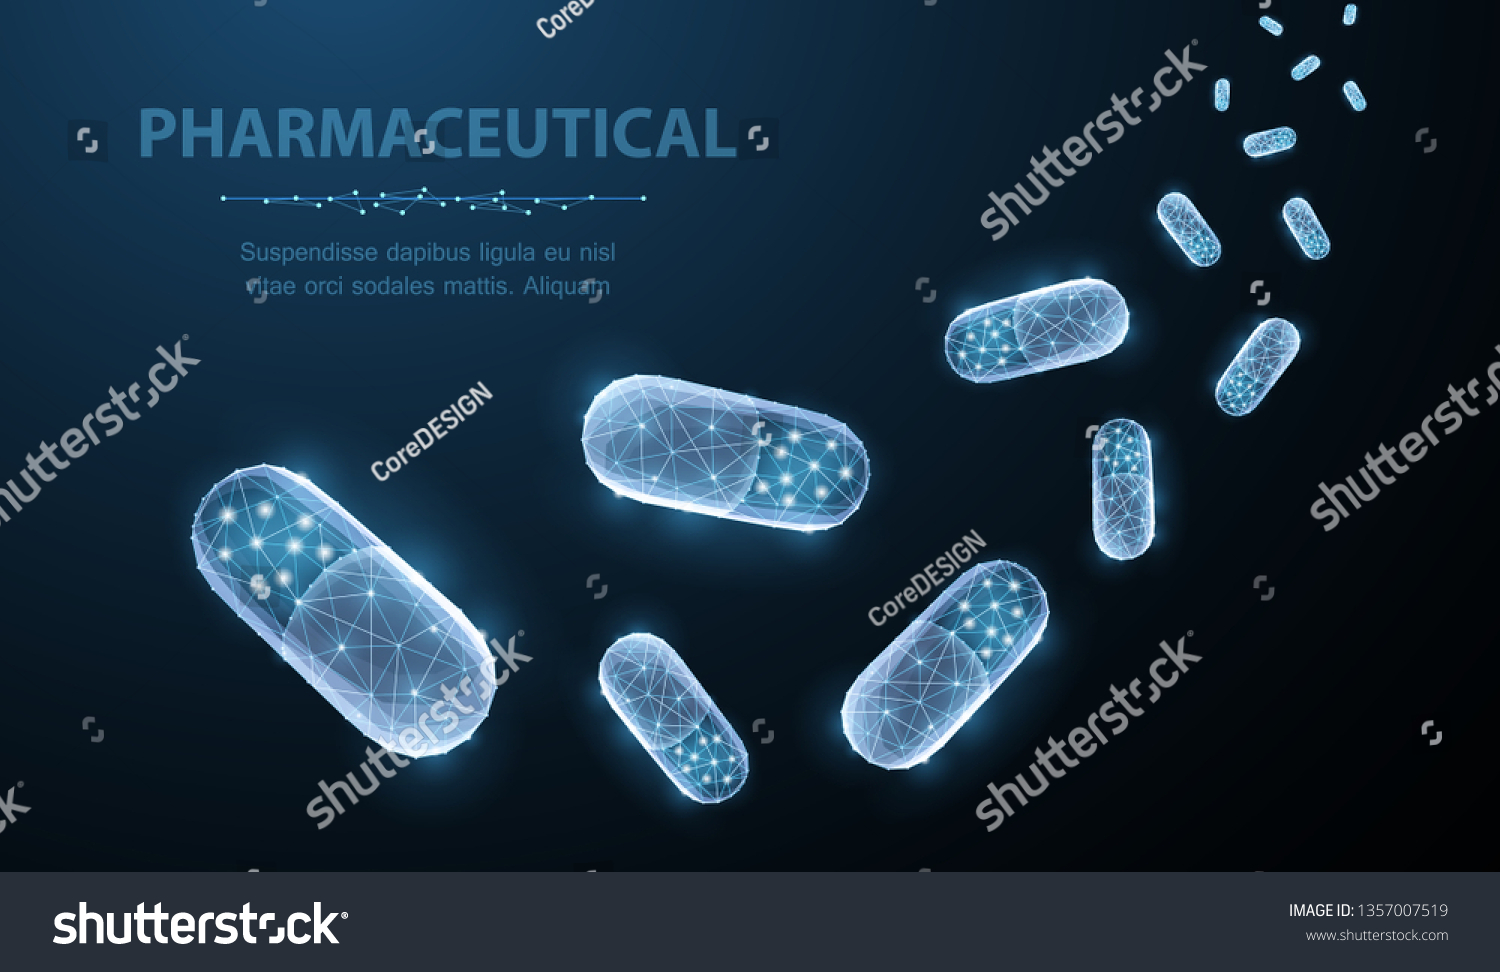 Pills. Abstract polygonal capsule pills falling on blue. Medical, pharmacy, health, vitamin, antibiotic, pharmaceutical, treatment concept illustration or background #1357007519